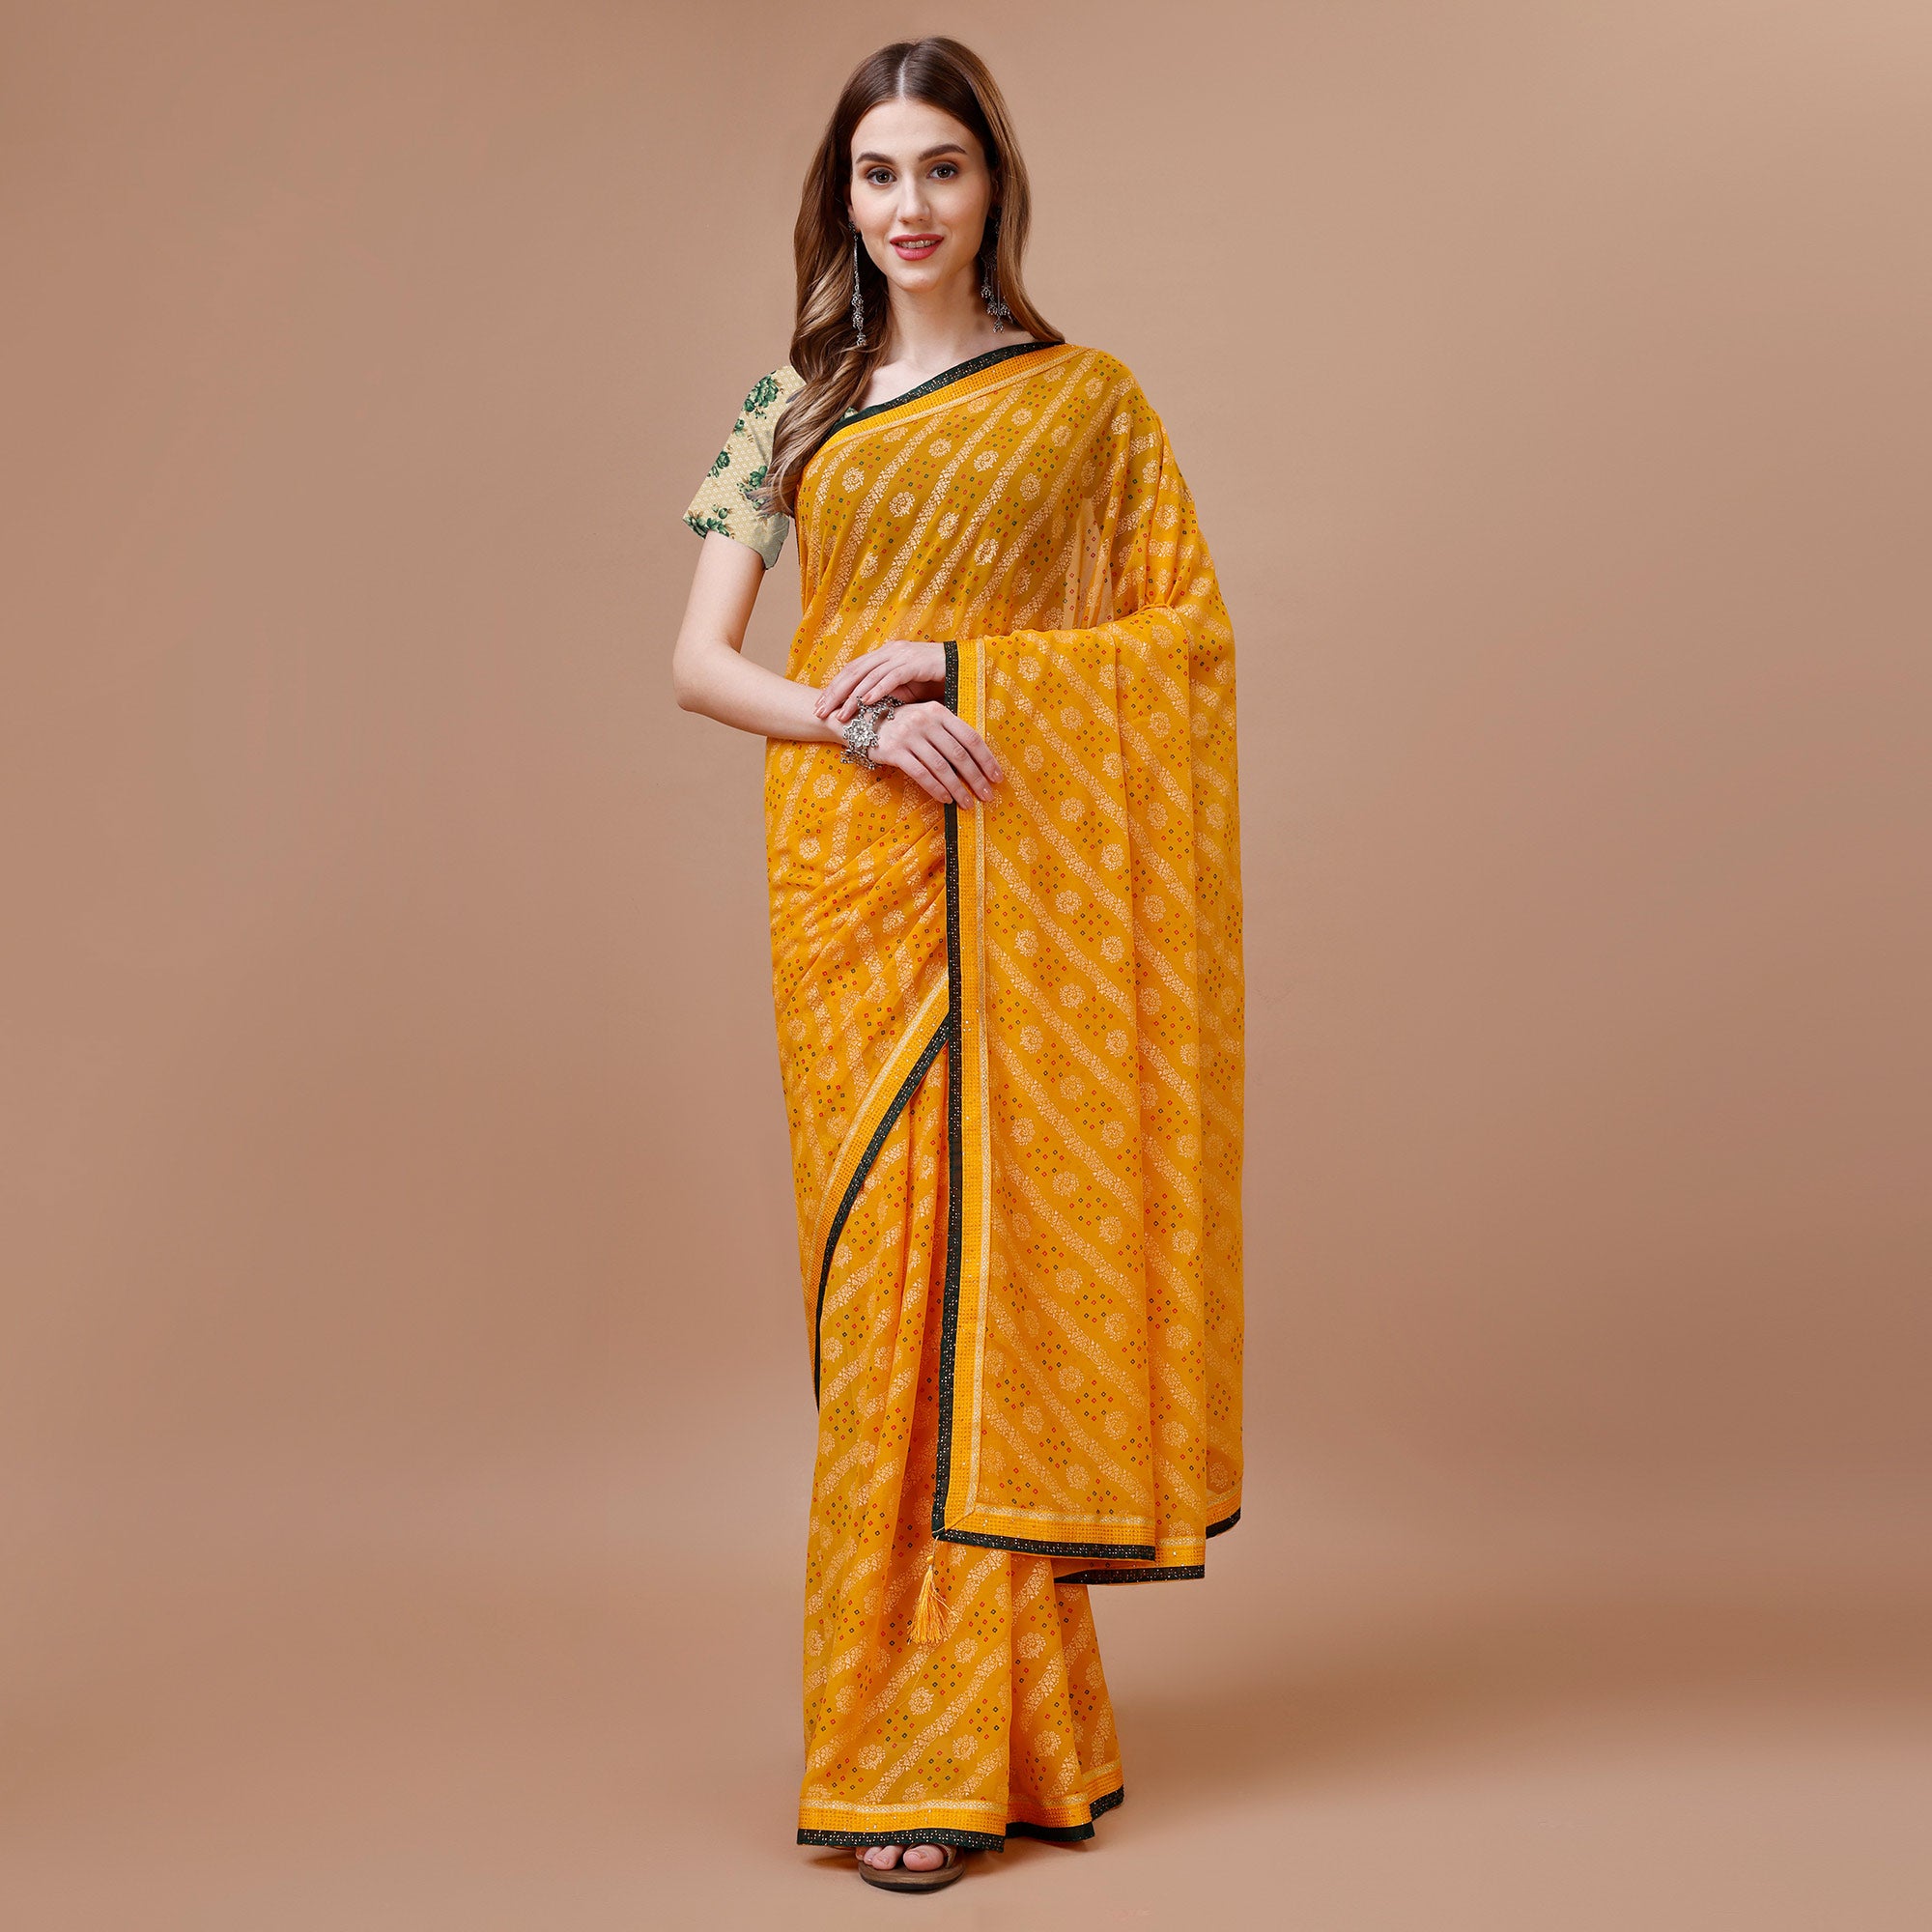 Yellow Floral Foil Printed Chiffon Saree With Lace Border